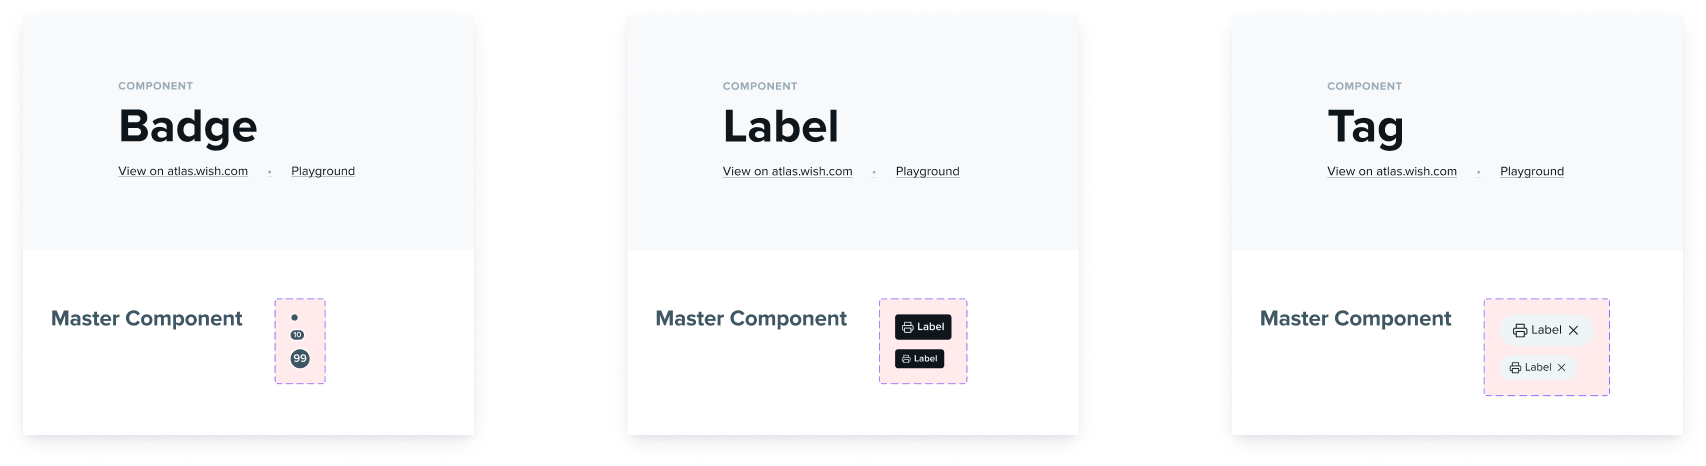 badge, label, and tag components